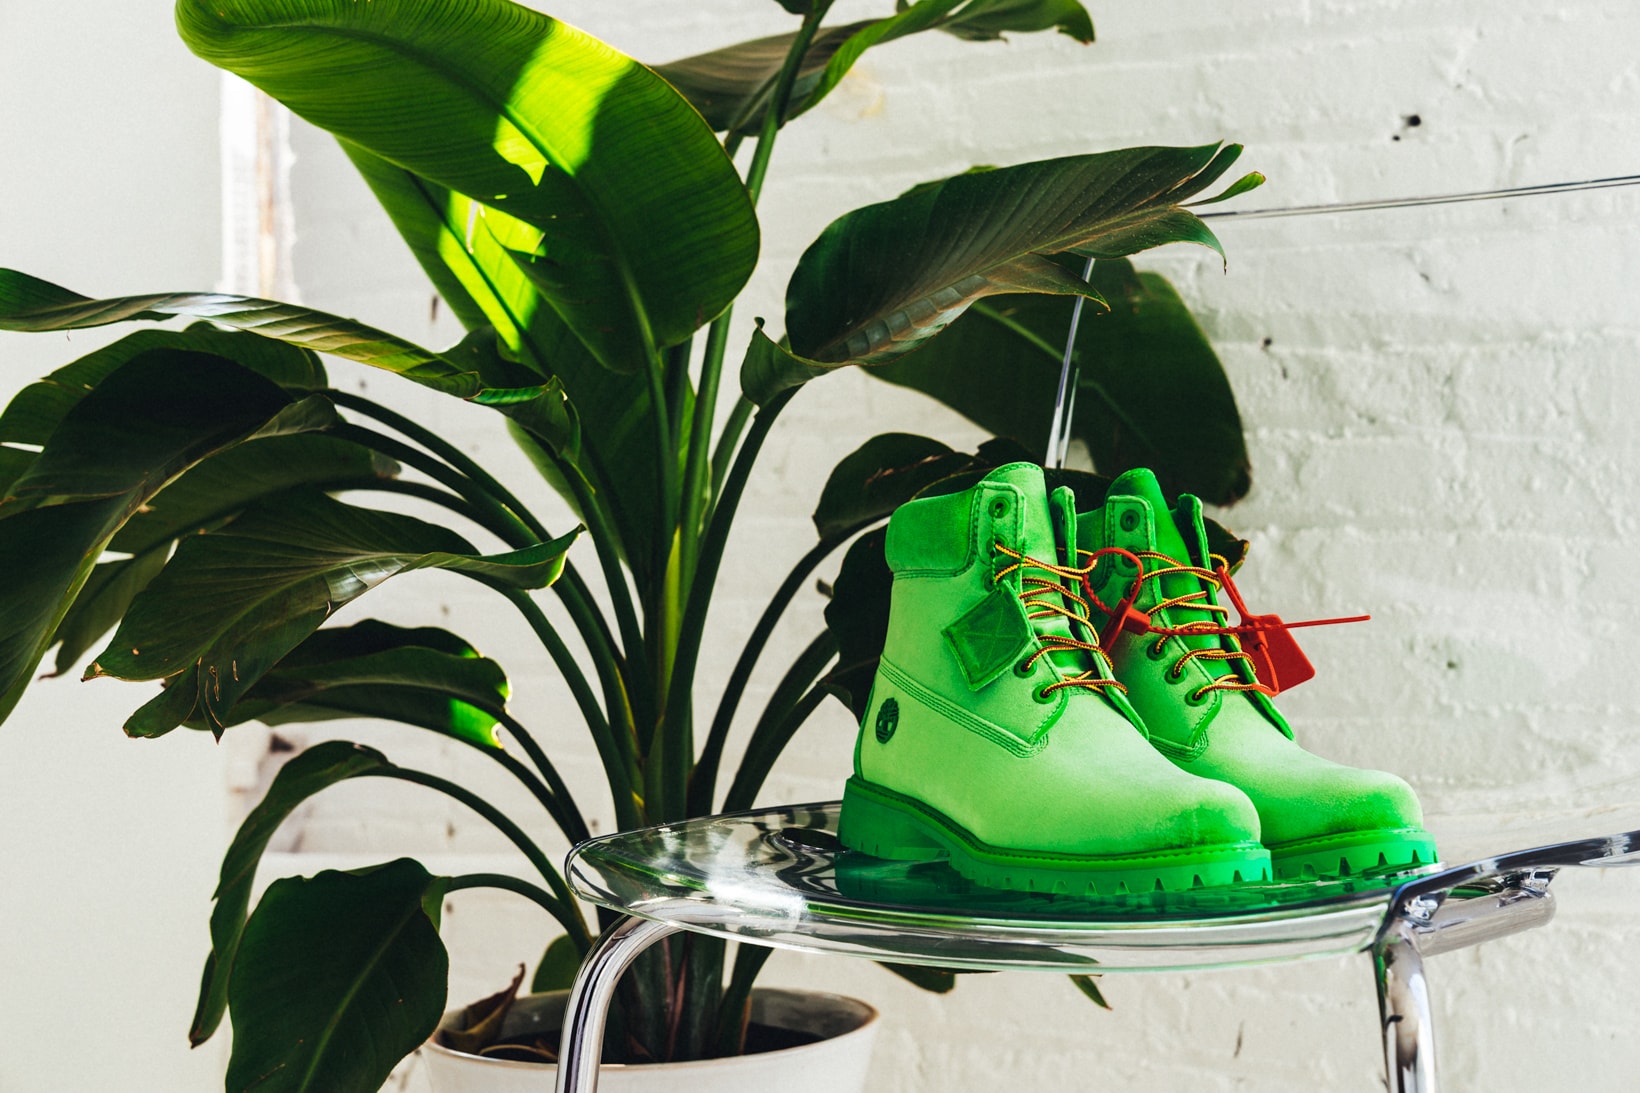 Close Look At The Off-White™ x Timberland Boots Collaboration drop release date 8 march 2018 Neon Green Orange 6 inch hang tag zip tie